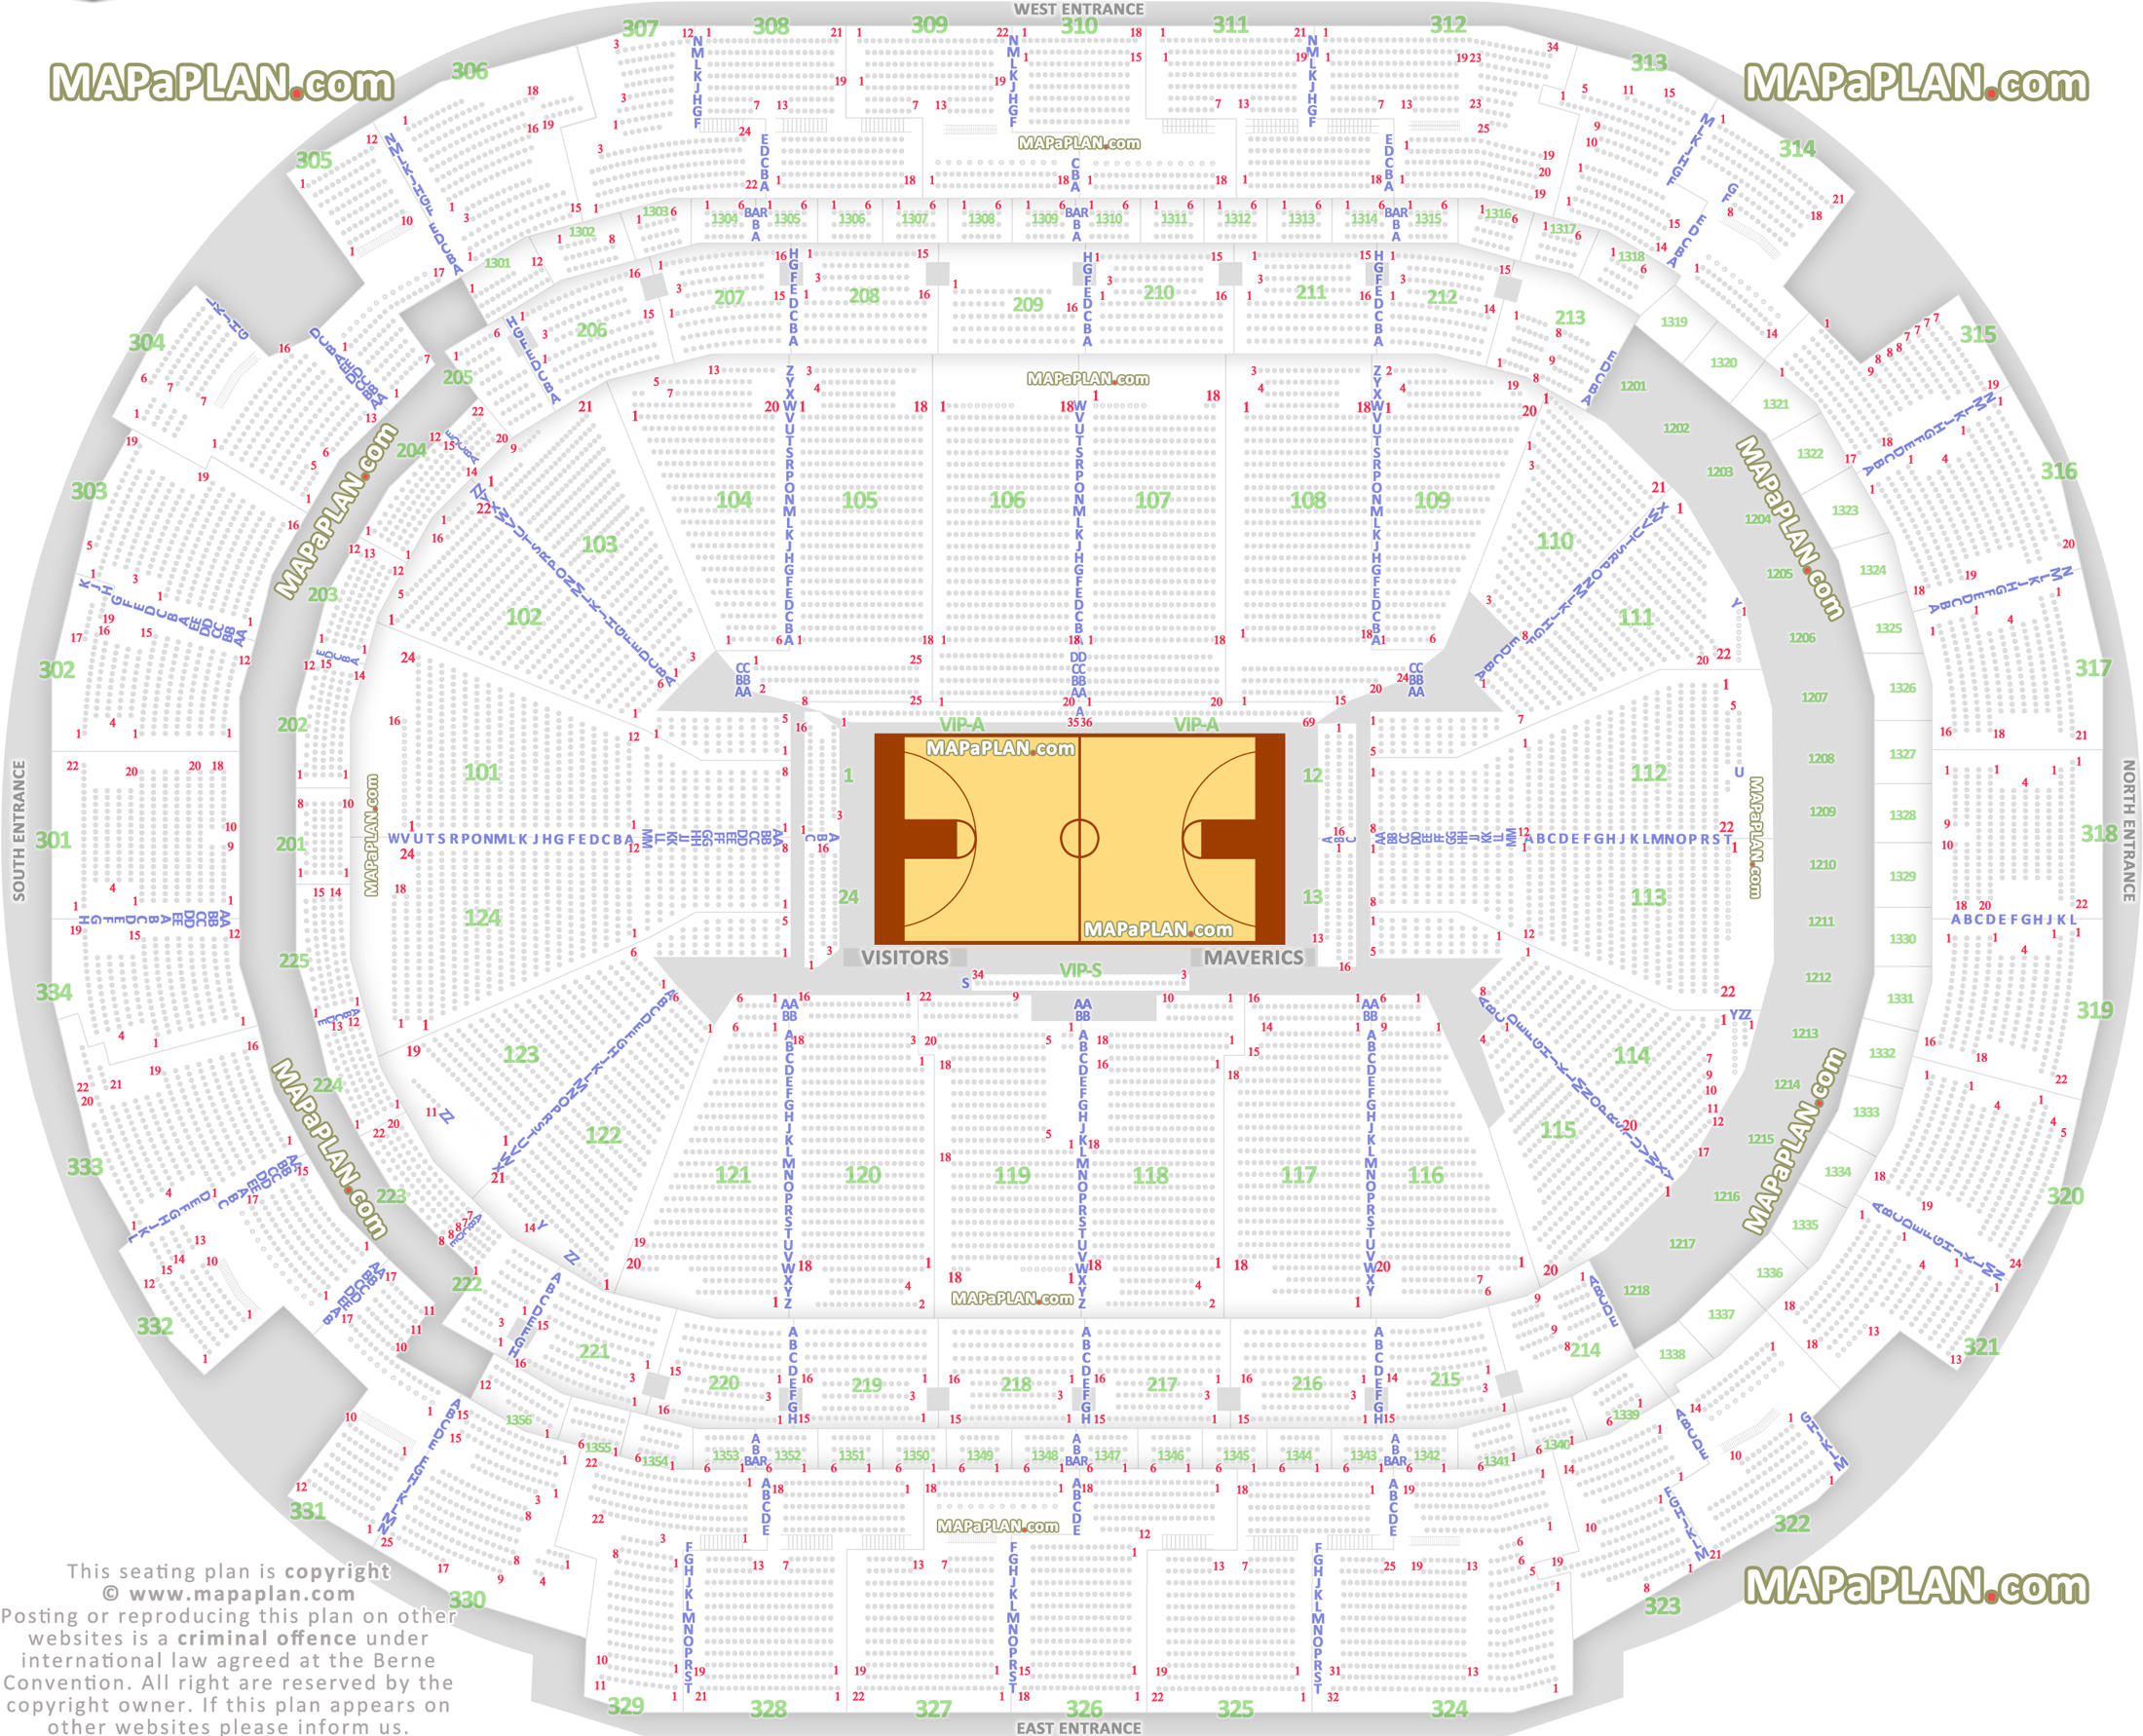 Aac Seating Chart With Seat Numbers